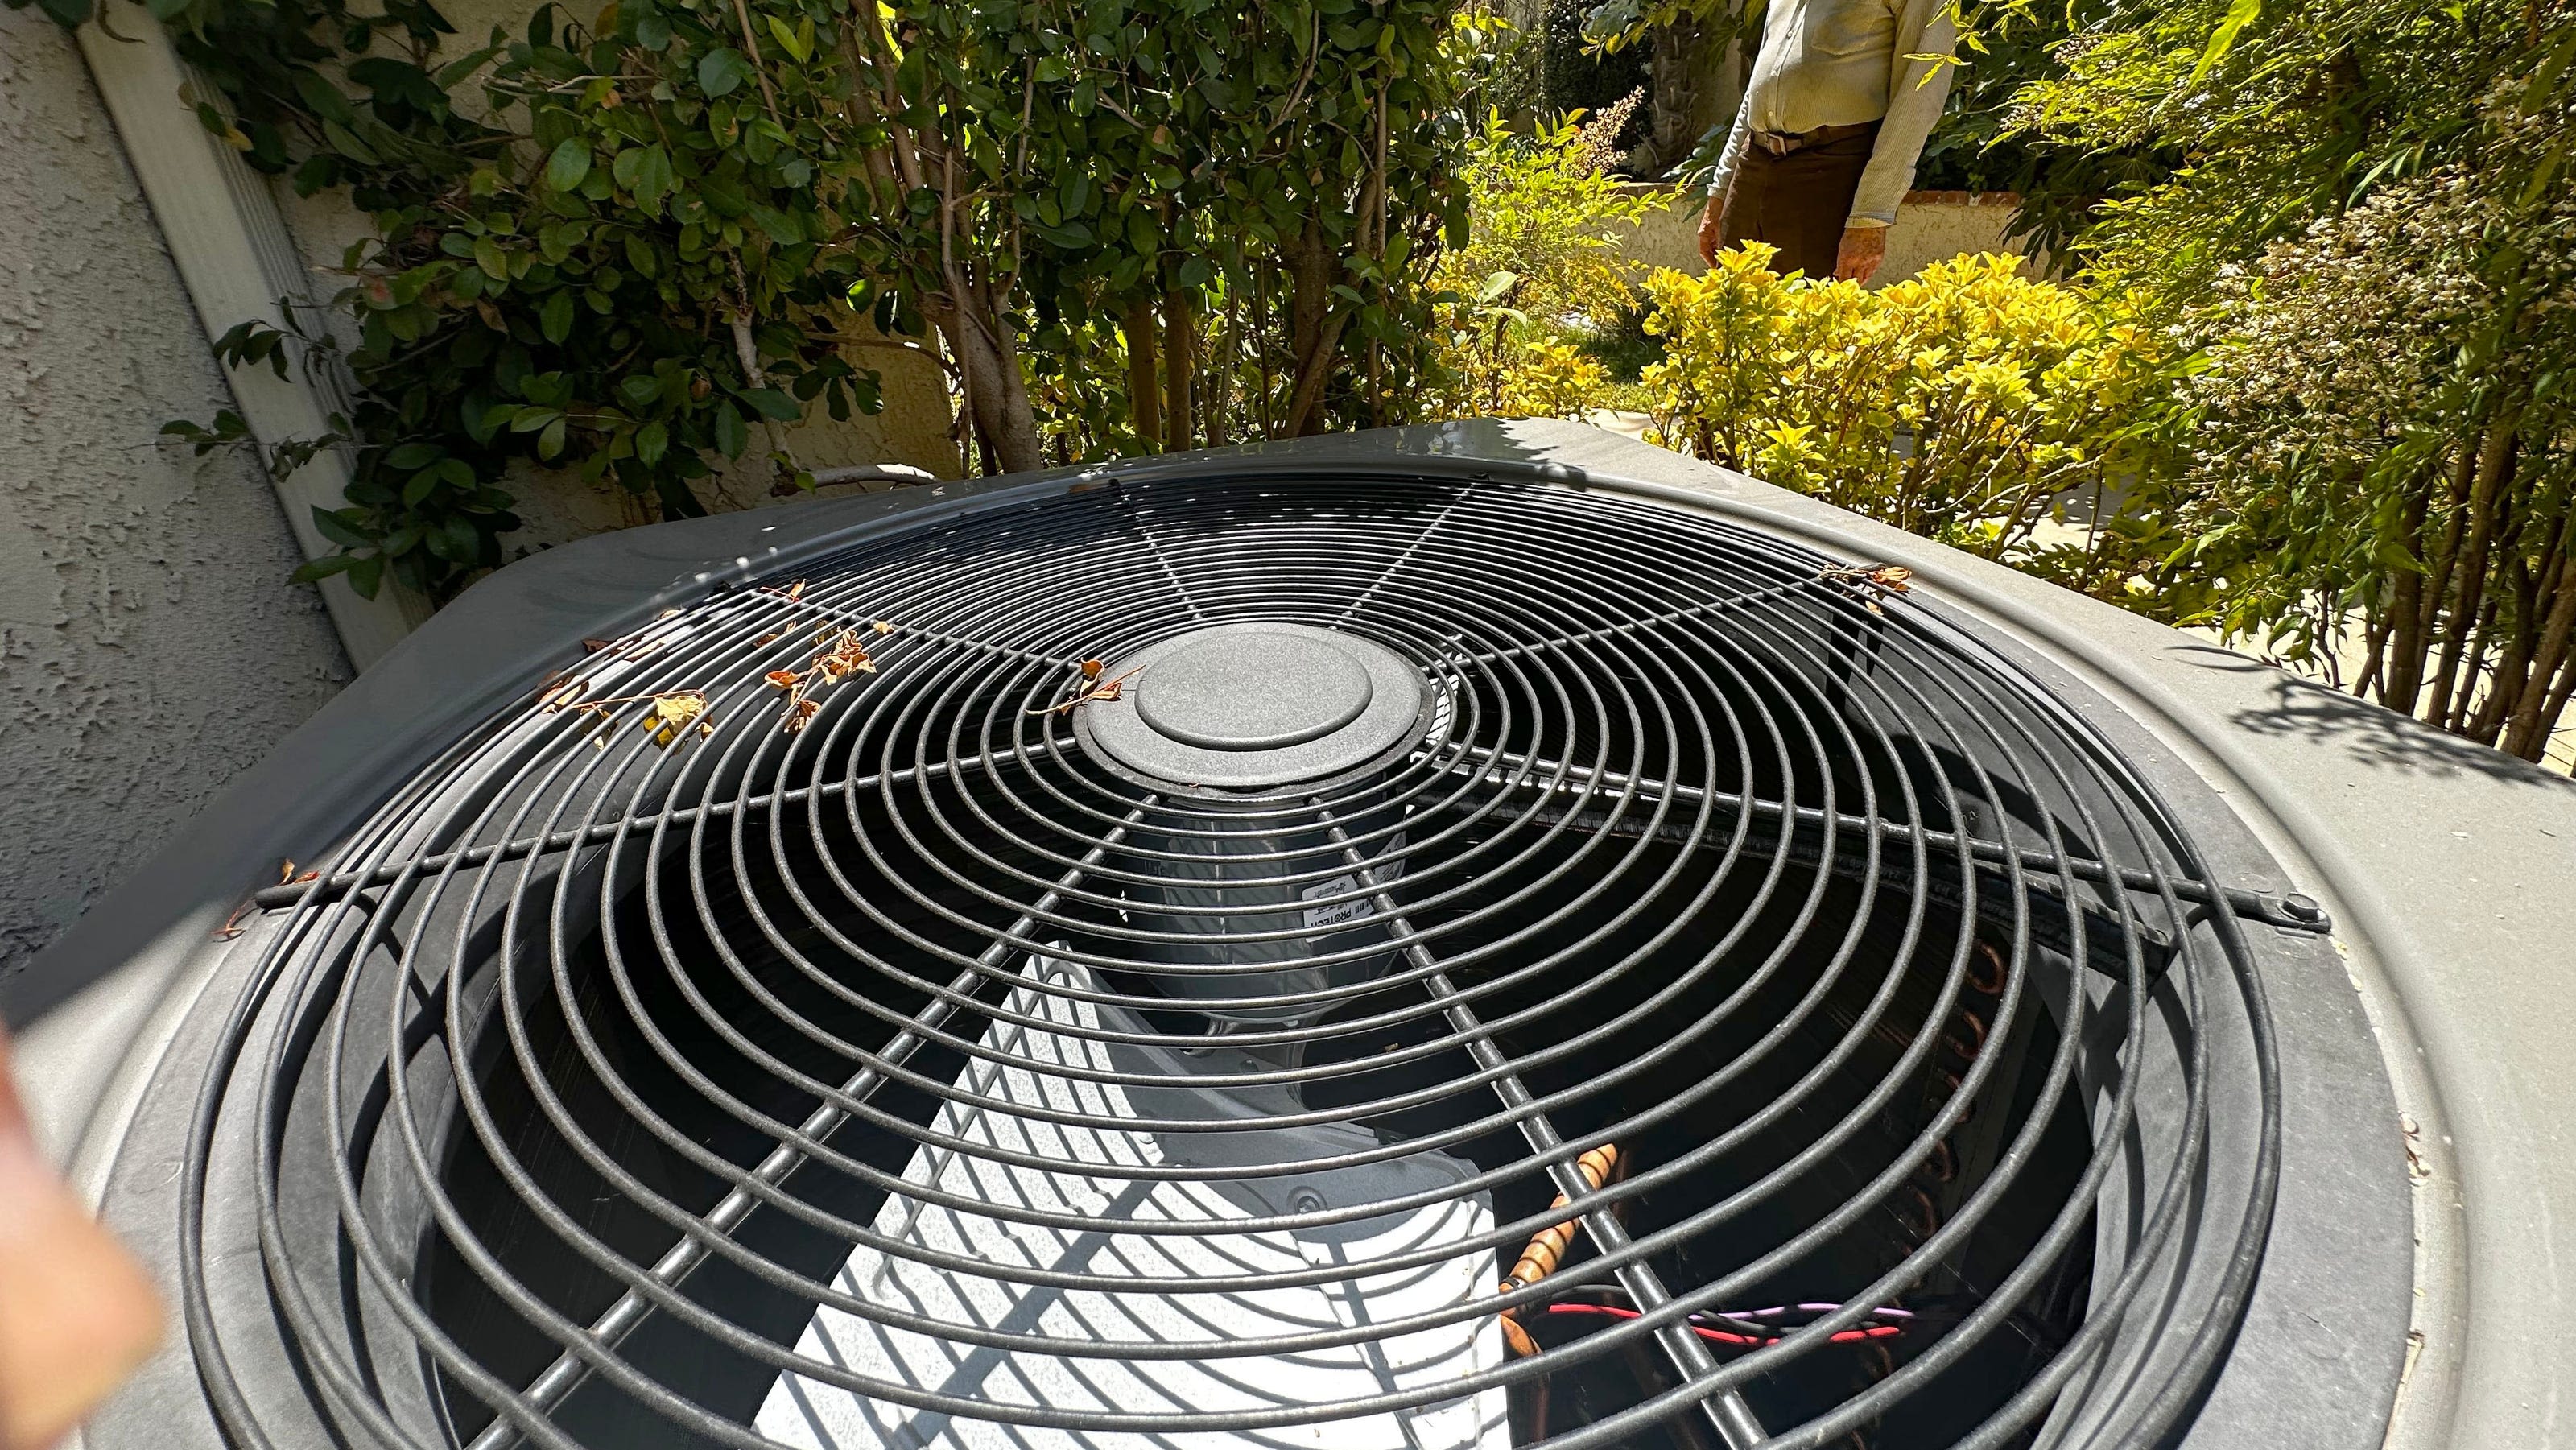 6 easy air conditioner tips to keep the cool air coming in the Arizona heat